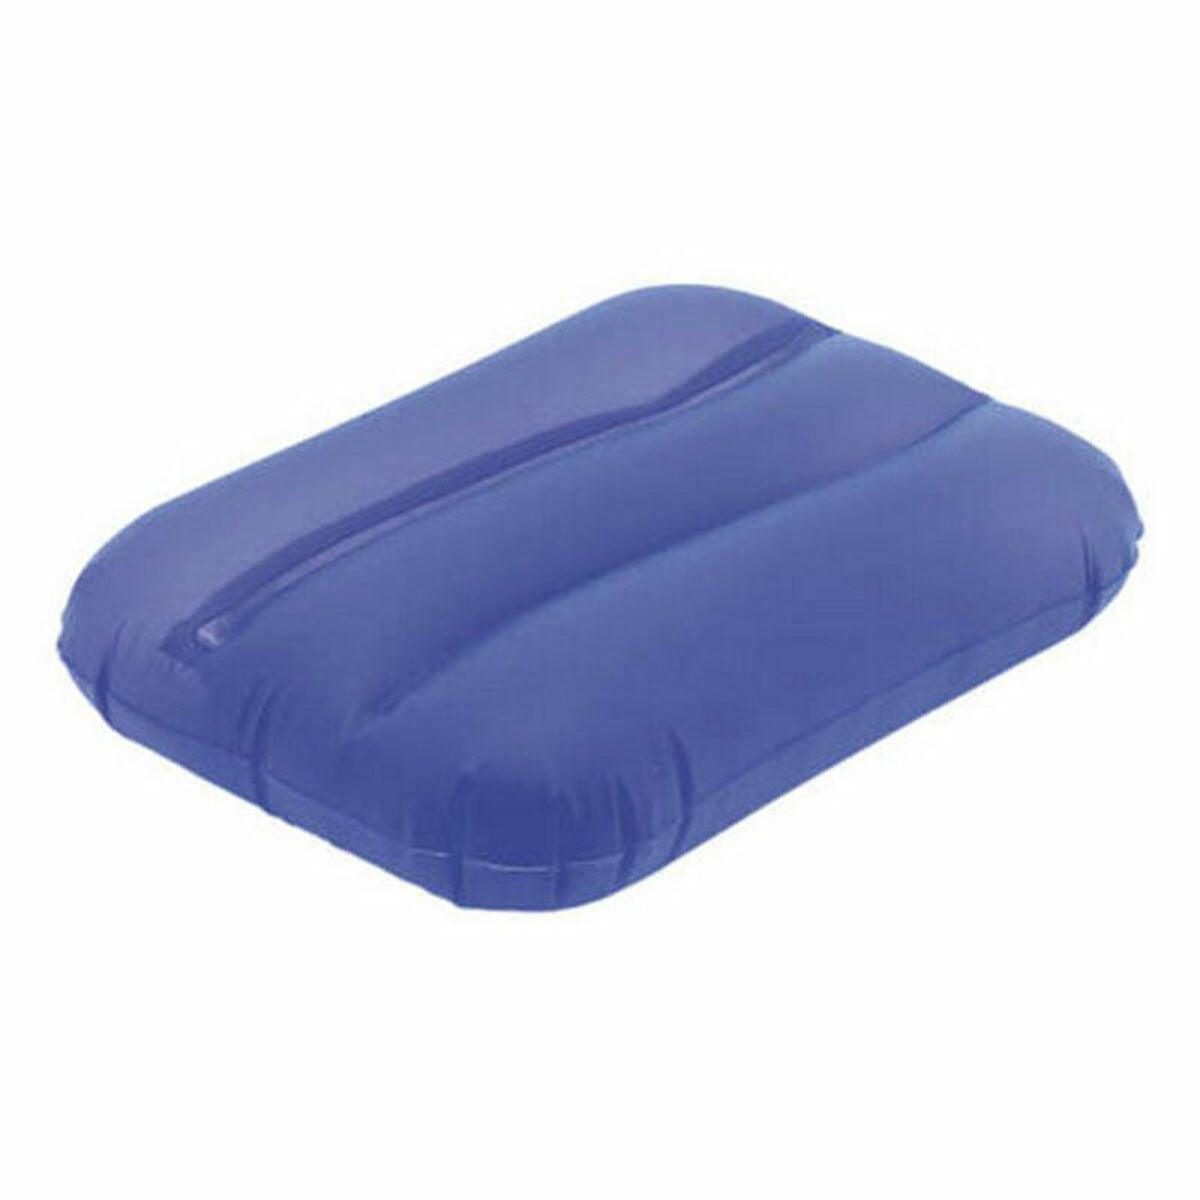 Inflatable Headrest for the Beach 143254 Rectangular - VirtuousWares:Global